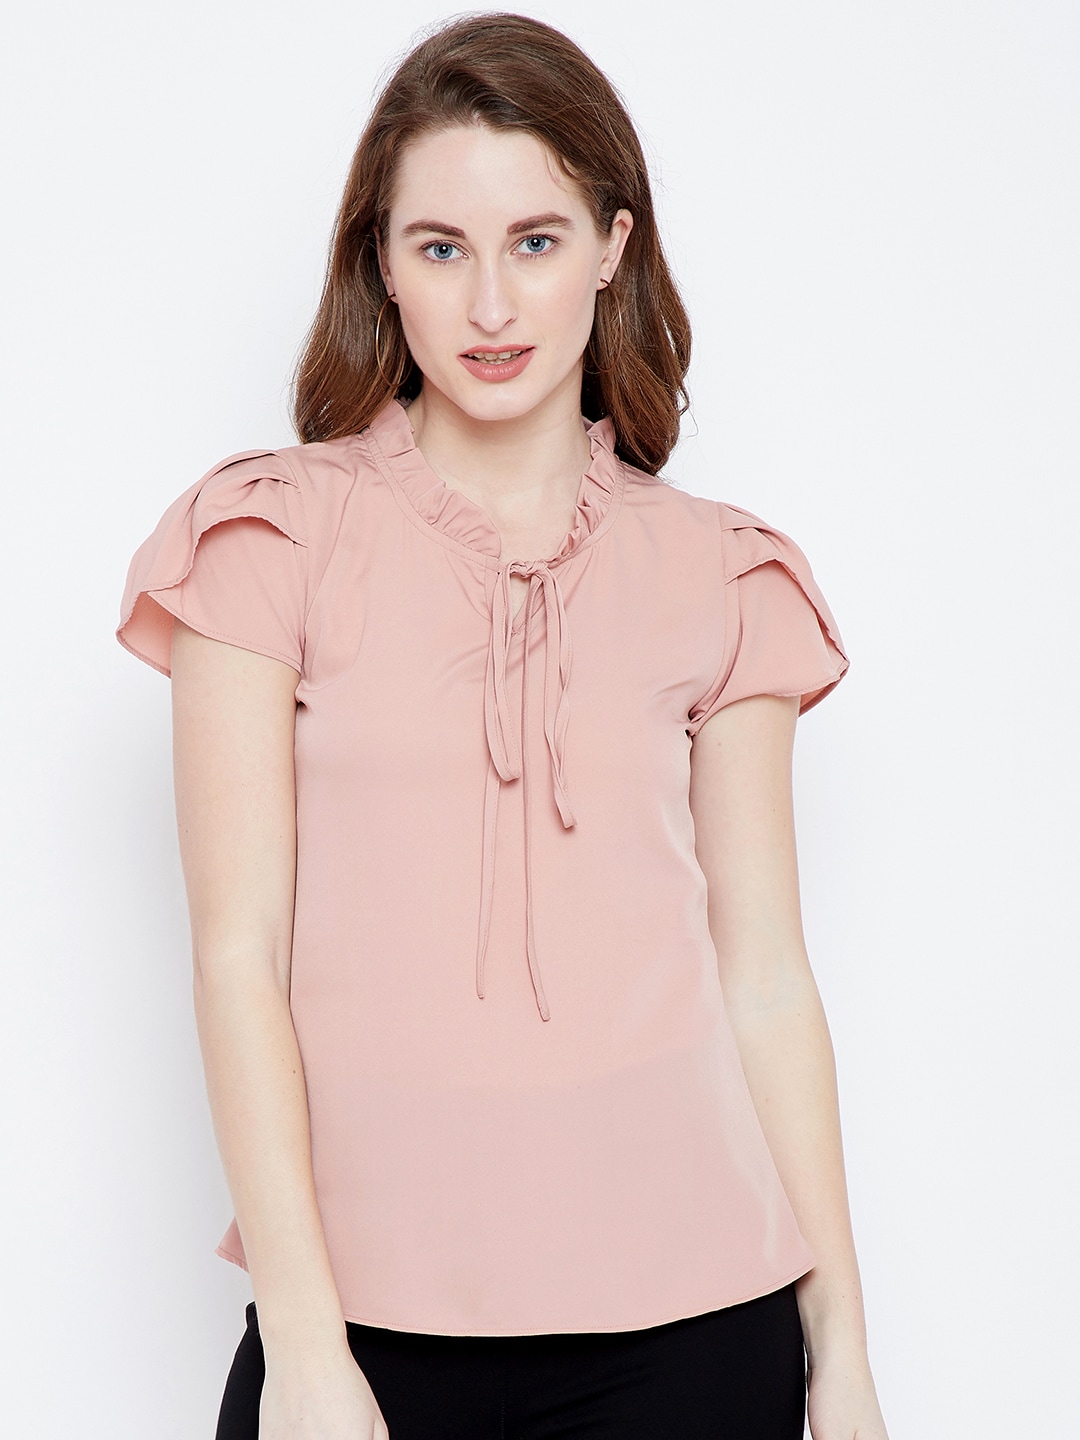 Berrylush Pink Front Twist Top Price in India